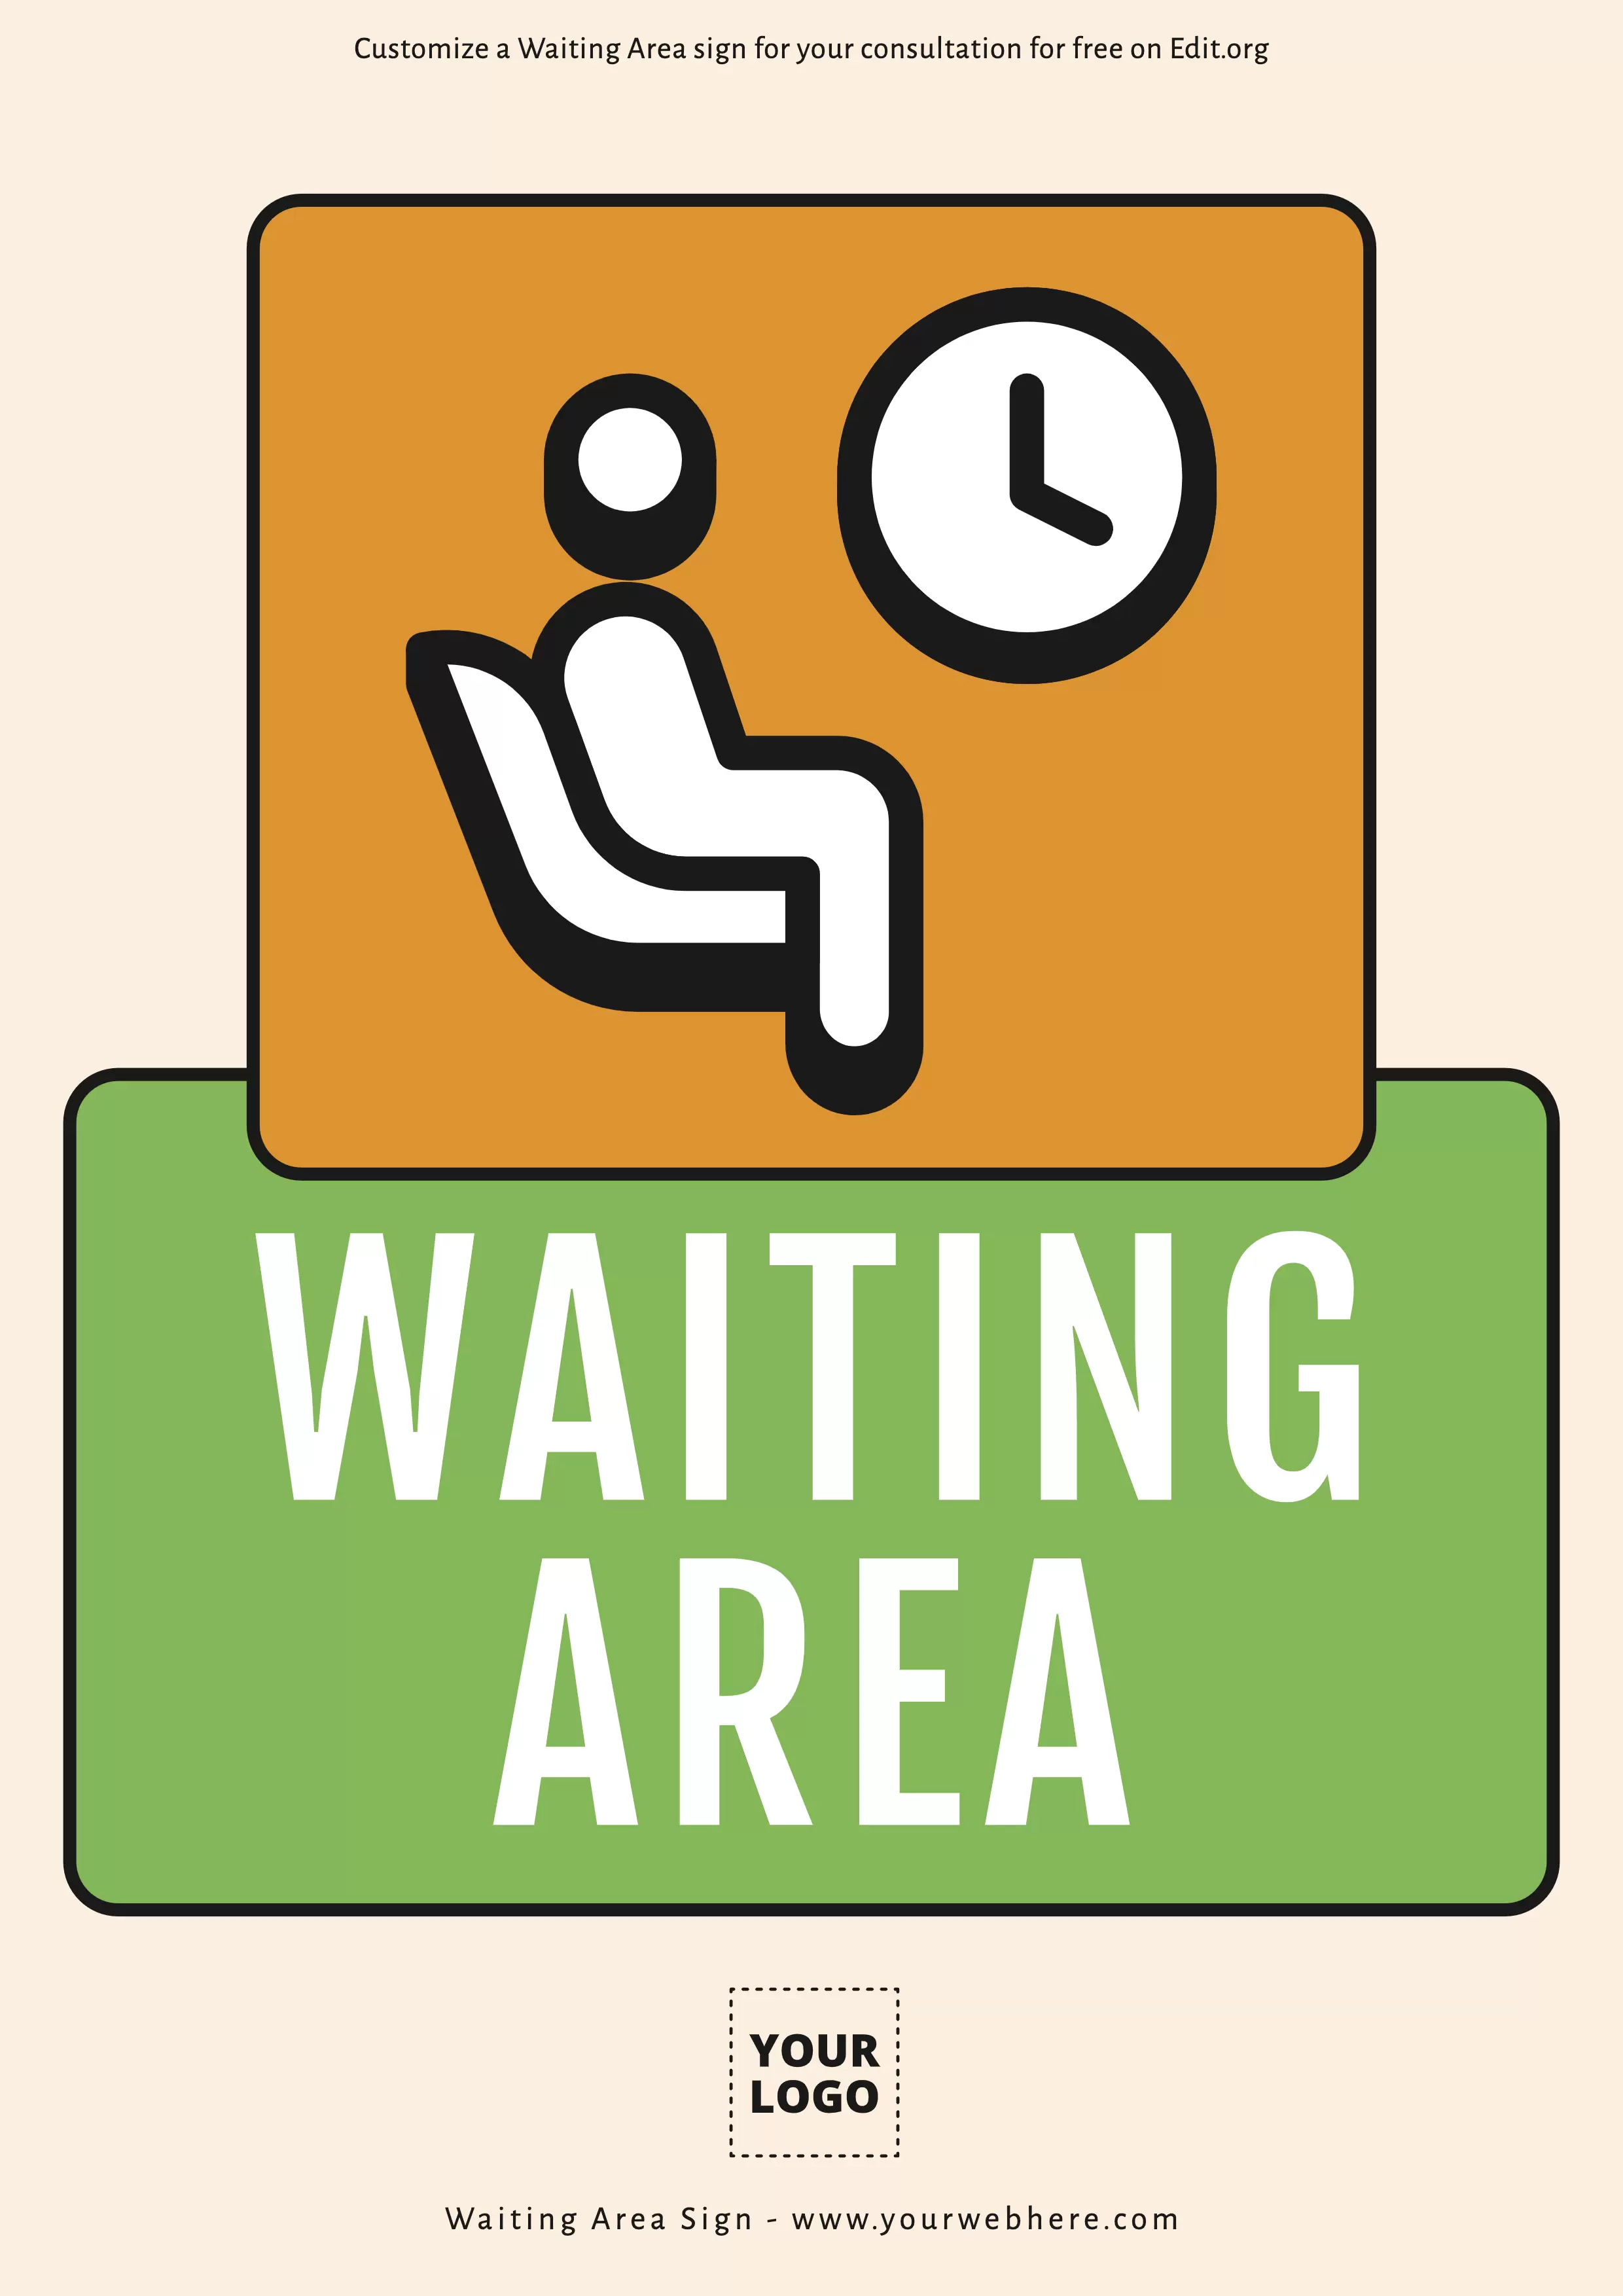 Free Waiting Area sign board template to customize